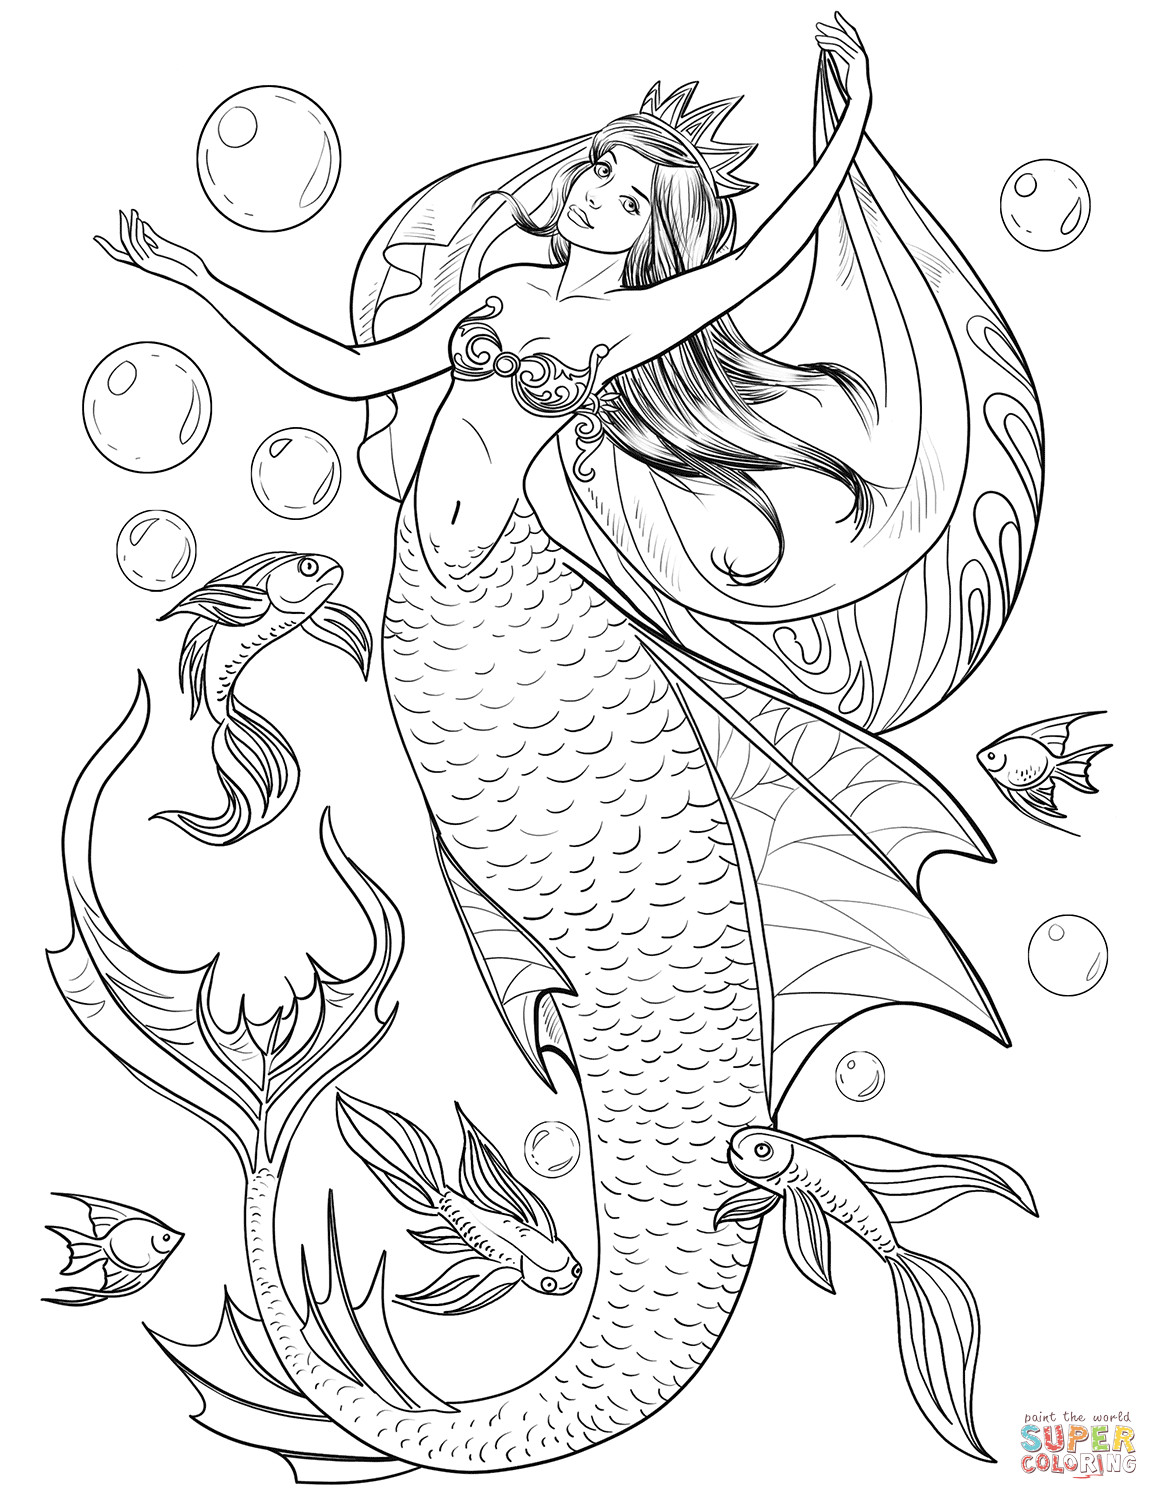 Magnifique Coloriage Sirene Facile Images Mermaid Coloring Pages My